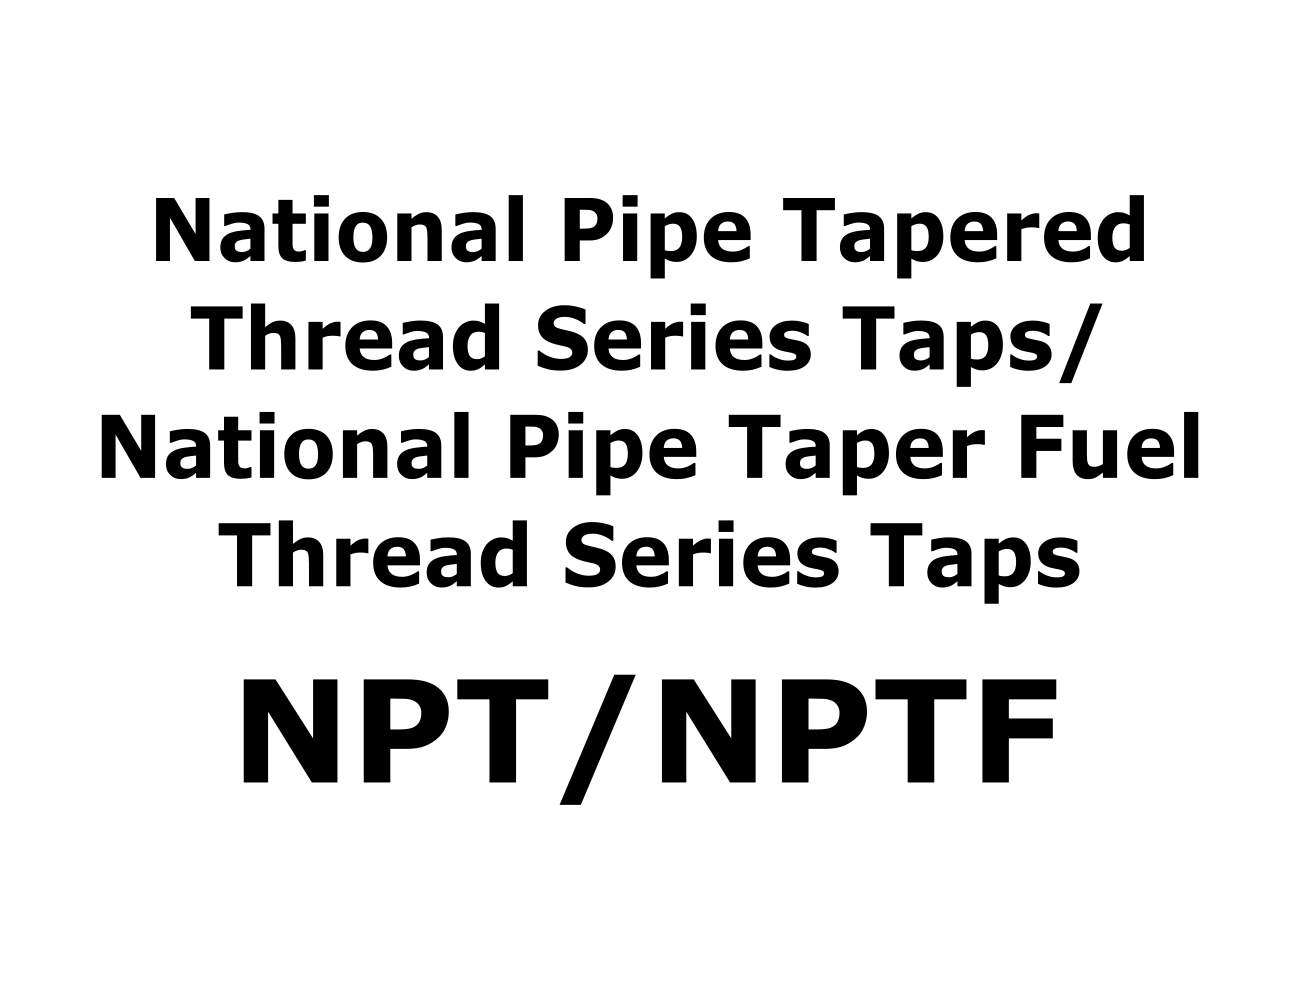 National Pipe Tapered Thread Series NPT/NPTF